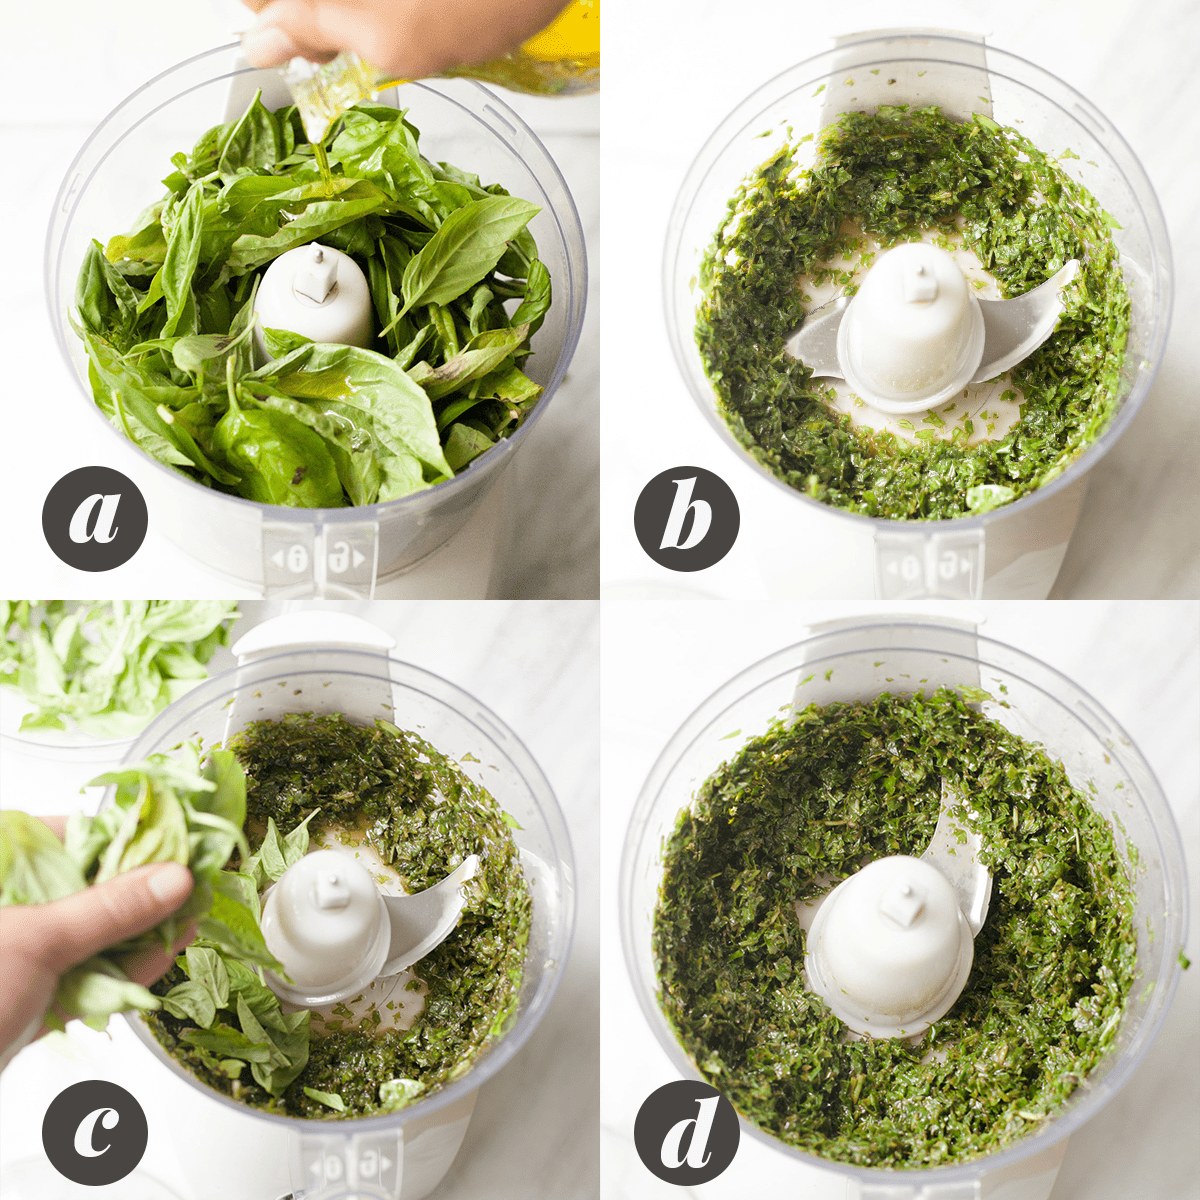 A four panel image showing the process of blending fresh basil with olive oil, as part of directions on how to freeze basil.